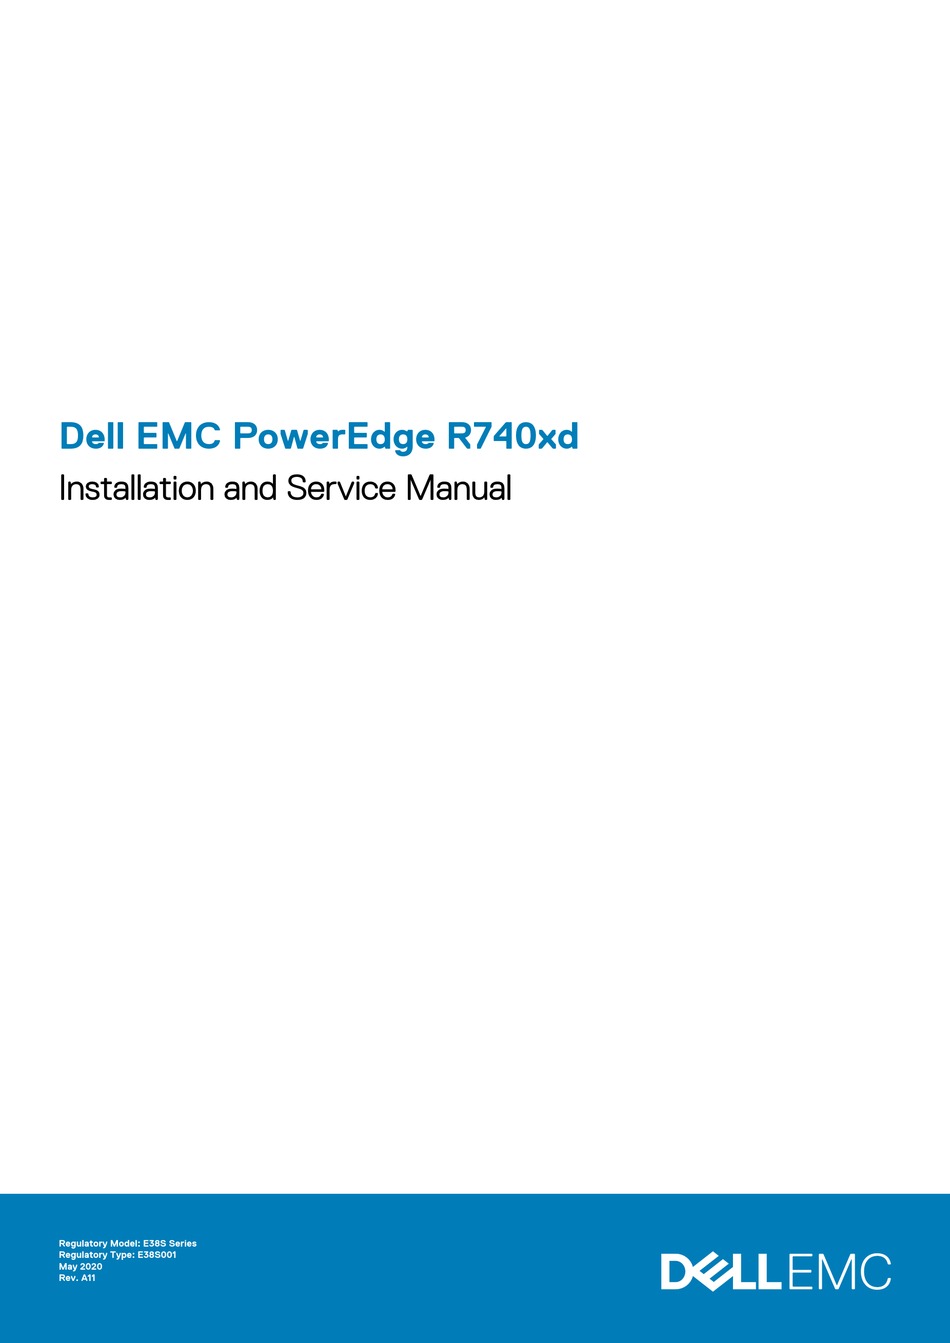 DELL EMC POWEREDGE R740XD INSTALLATION AND SERVICE MANUAL Pdf Download